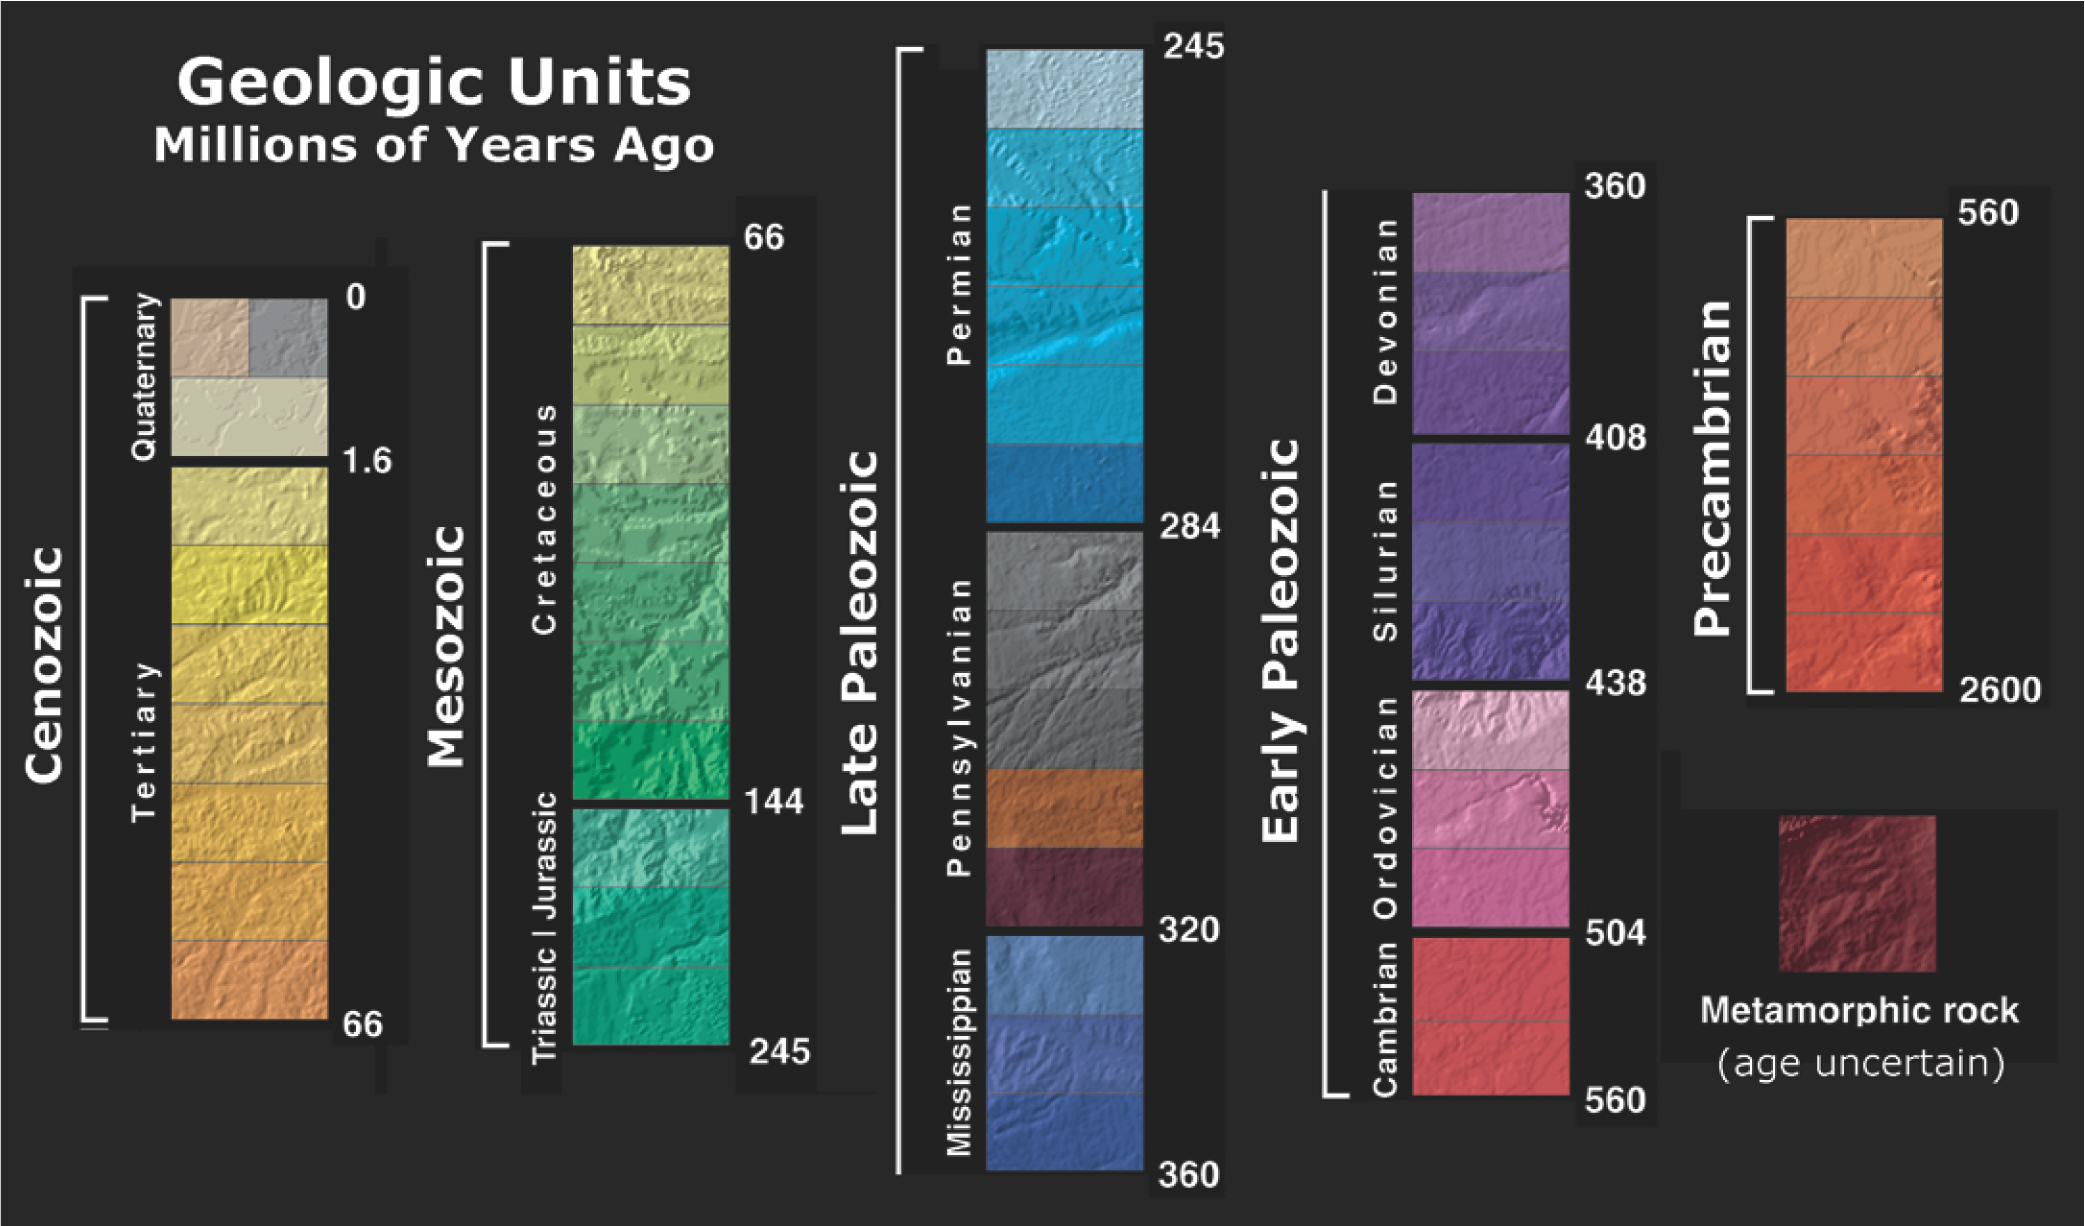 Color-coded map key for geologic ages